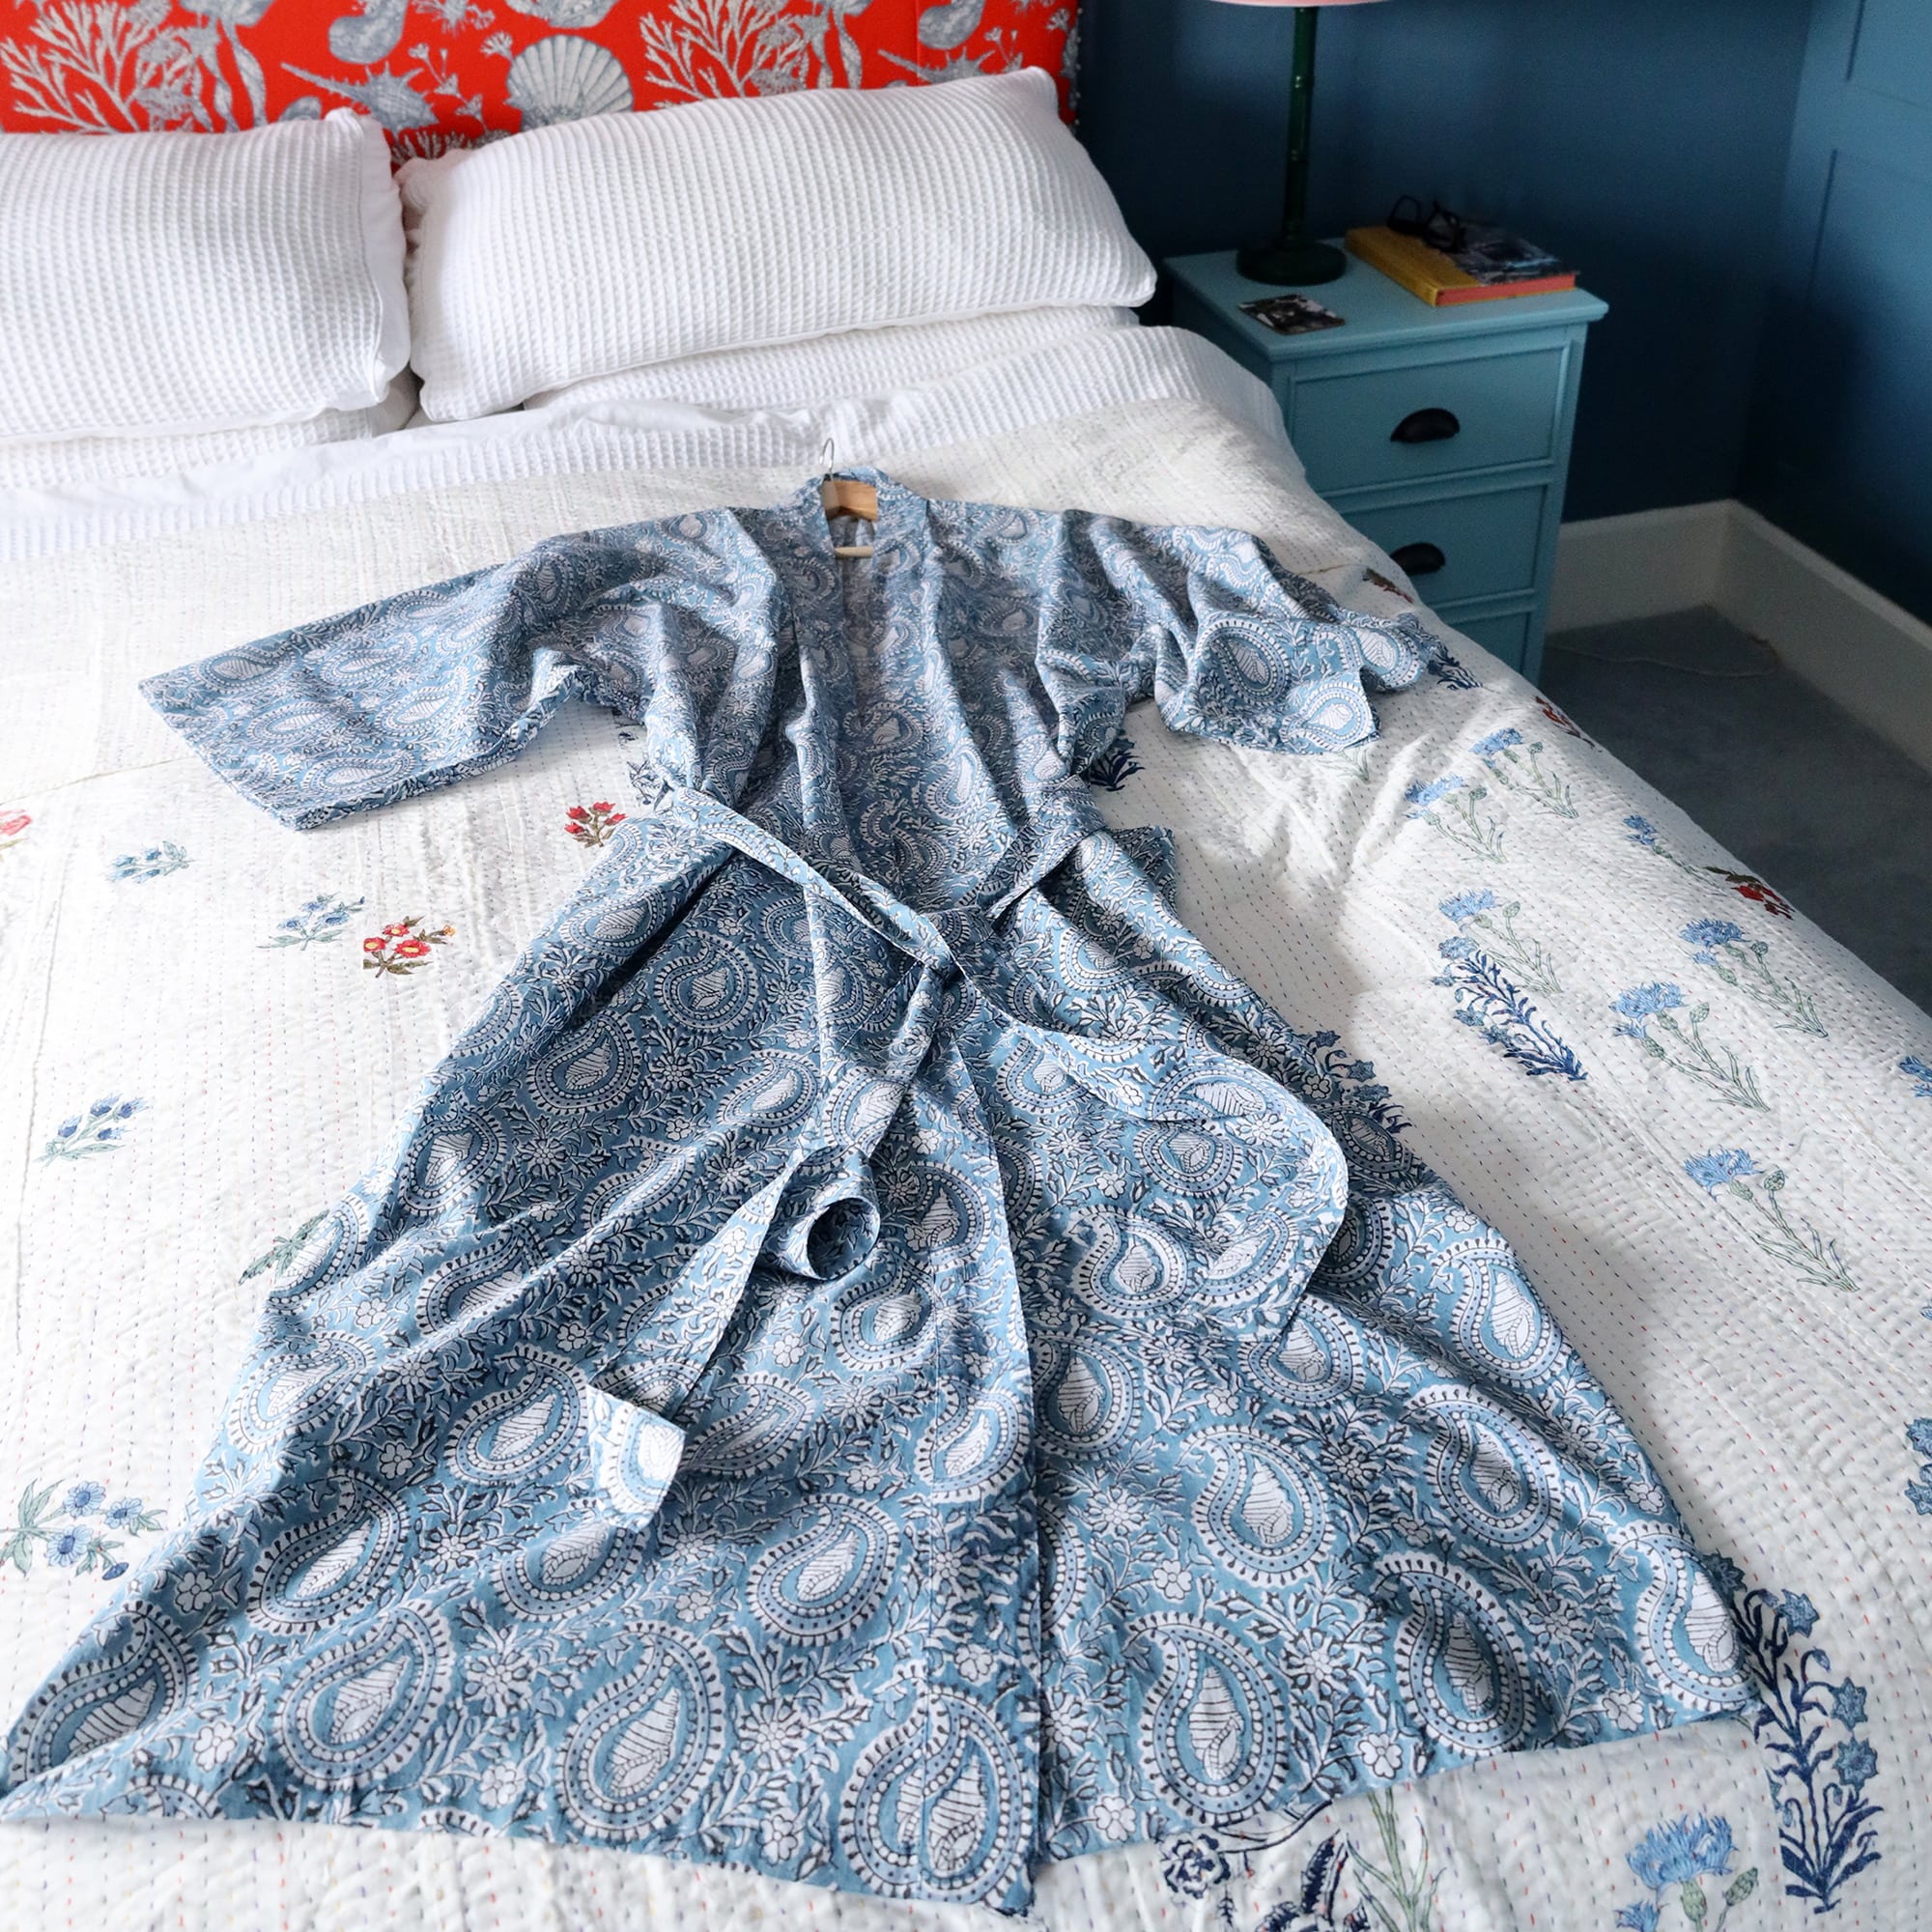 Azure Paisley Shell dressing gown which is Hand block printed fabric in a soft blue.At the head of the bed is a bright red and white headboard with shell patterns.The gown is placed on a bed with a white cover with occasional bright flowers. You can see the blue bedside cabinet with a lamp base and a marble swirl lampshade.